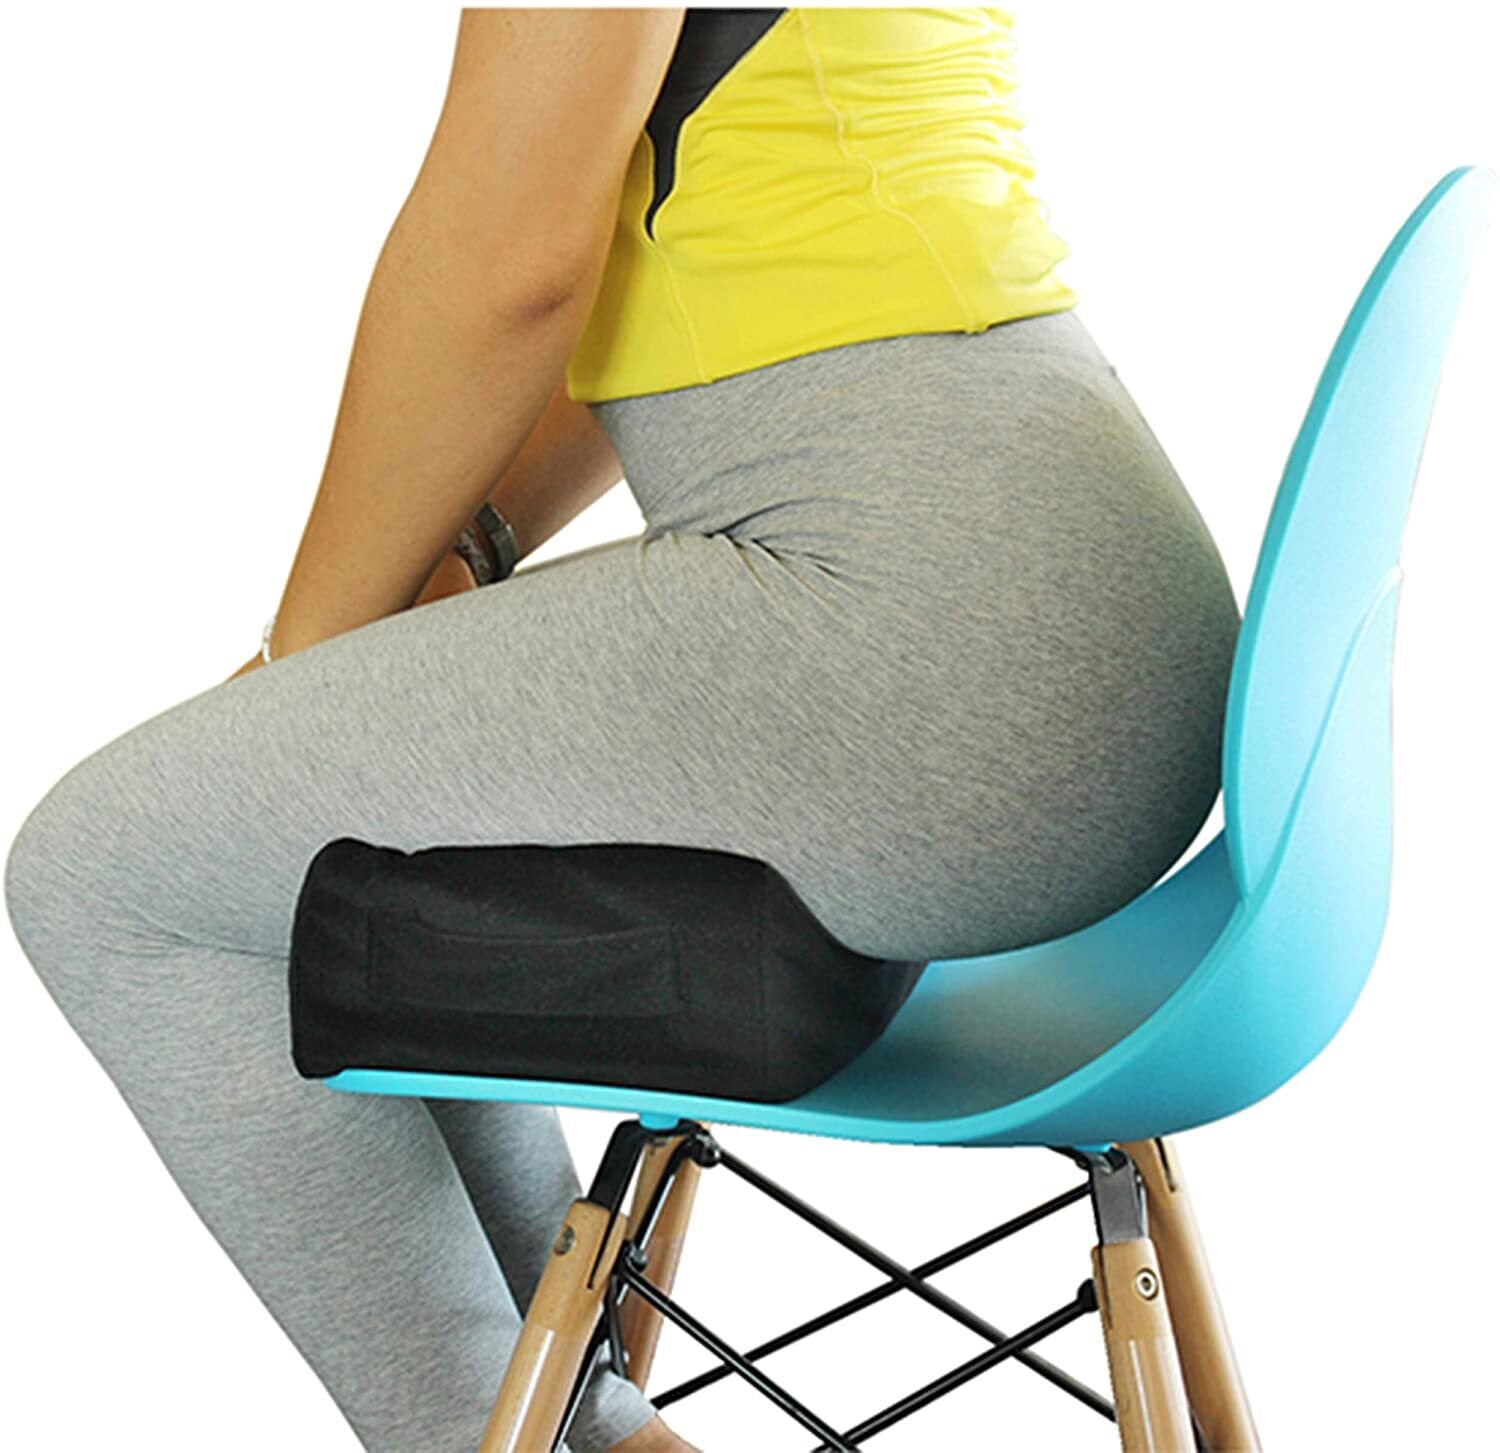 Brazilian Butt Lift Pillow + Back Support Cushion with Carrying Bag an –  Tranquility Nurse Concierge